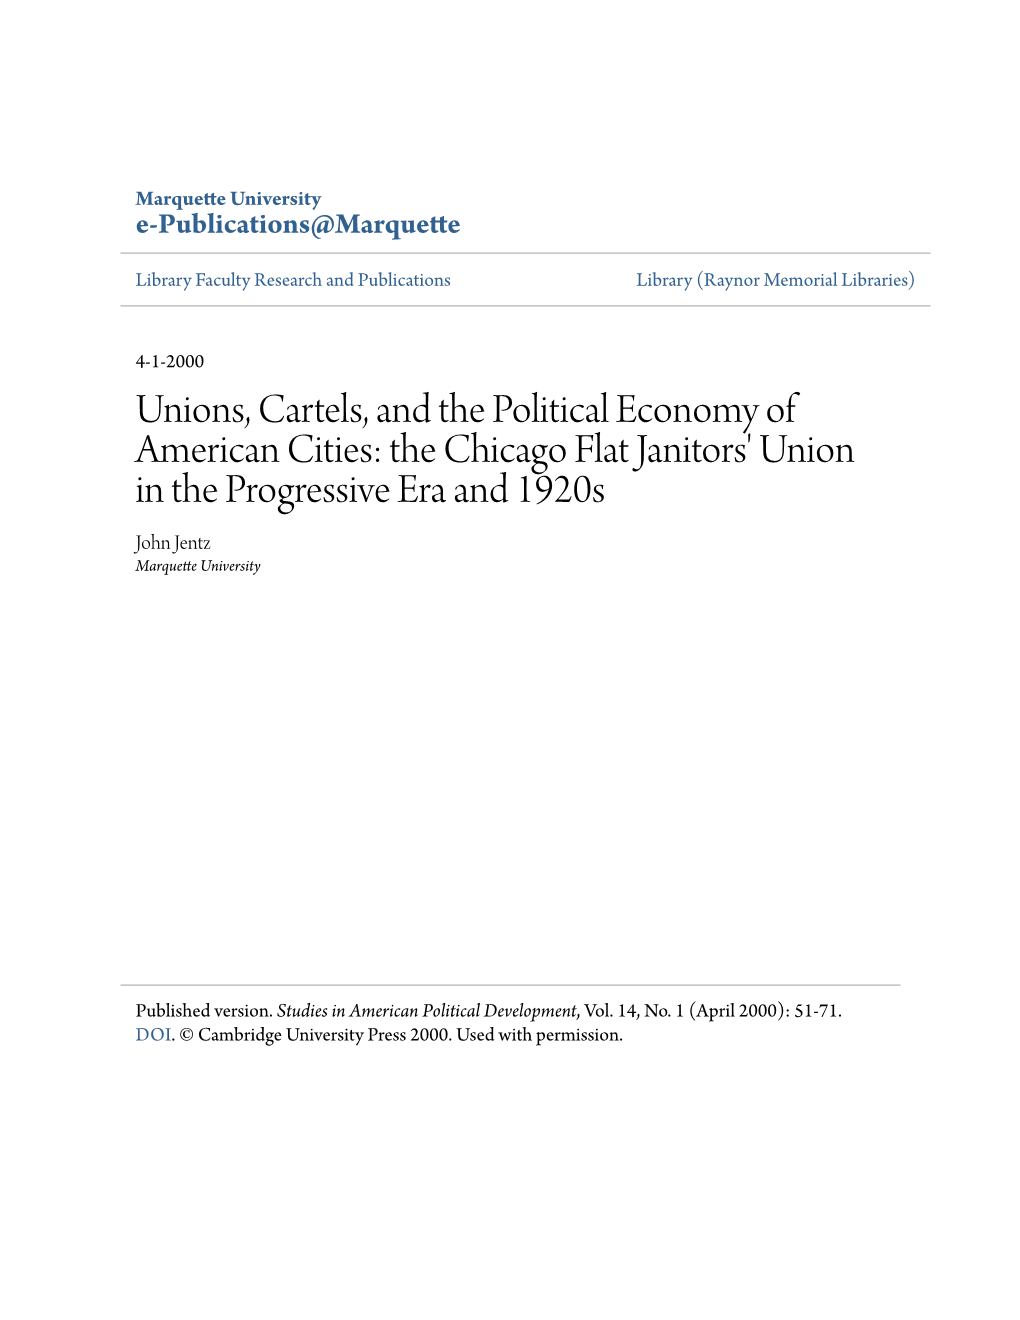 Unions, Cartels, and the Political Economy of American Cities: the Chicago Flat Janitors' Union in the Progressive Era and 1920S John Jentz Marquette University